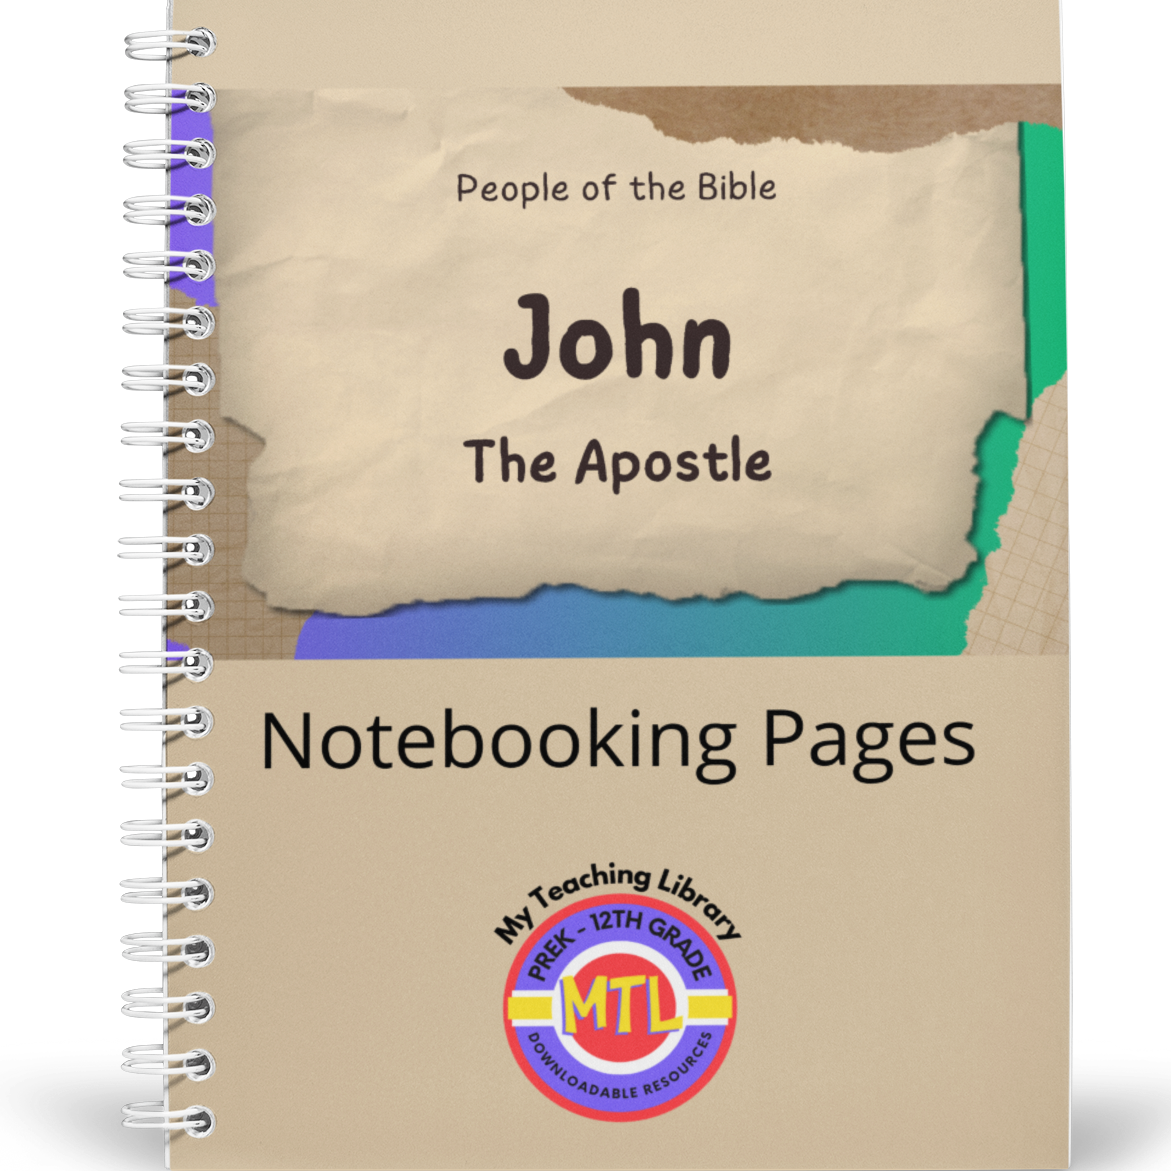 Z 337 John the Apostle people of the bible cover